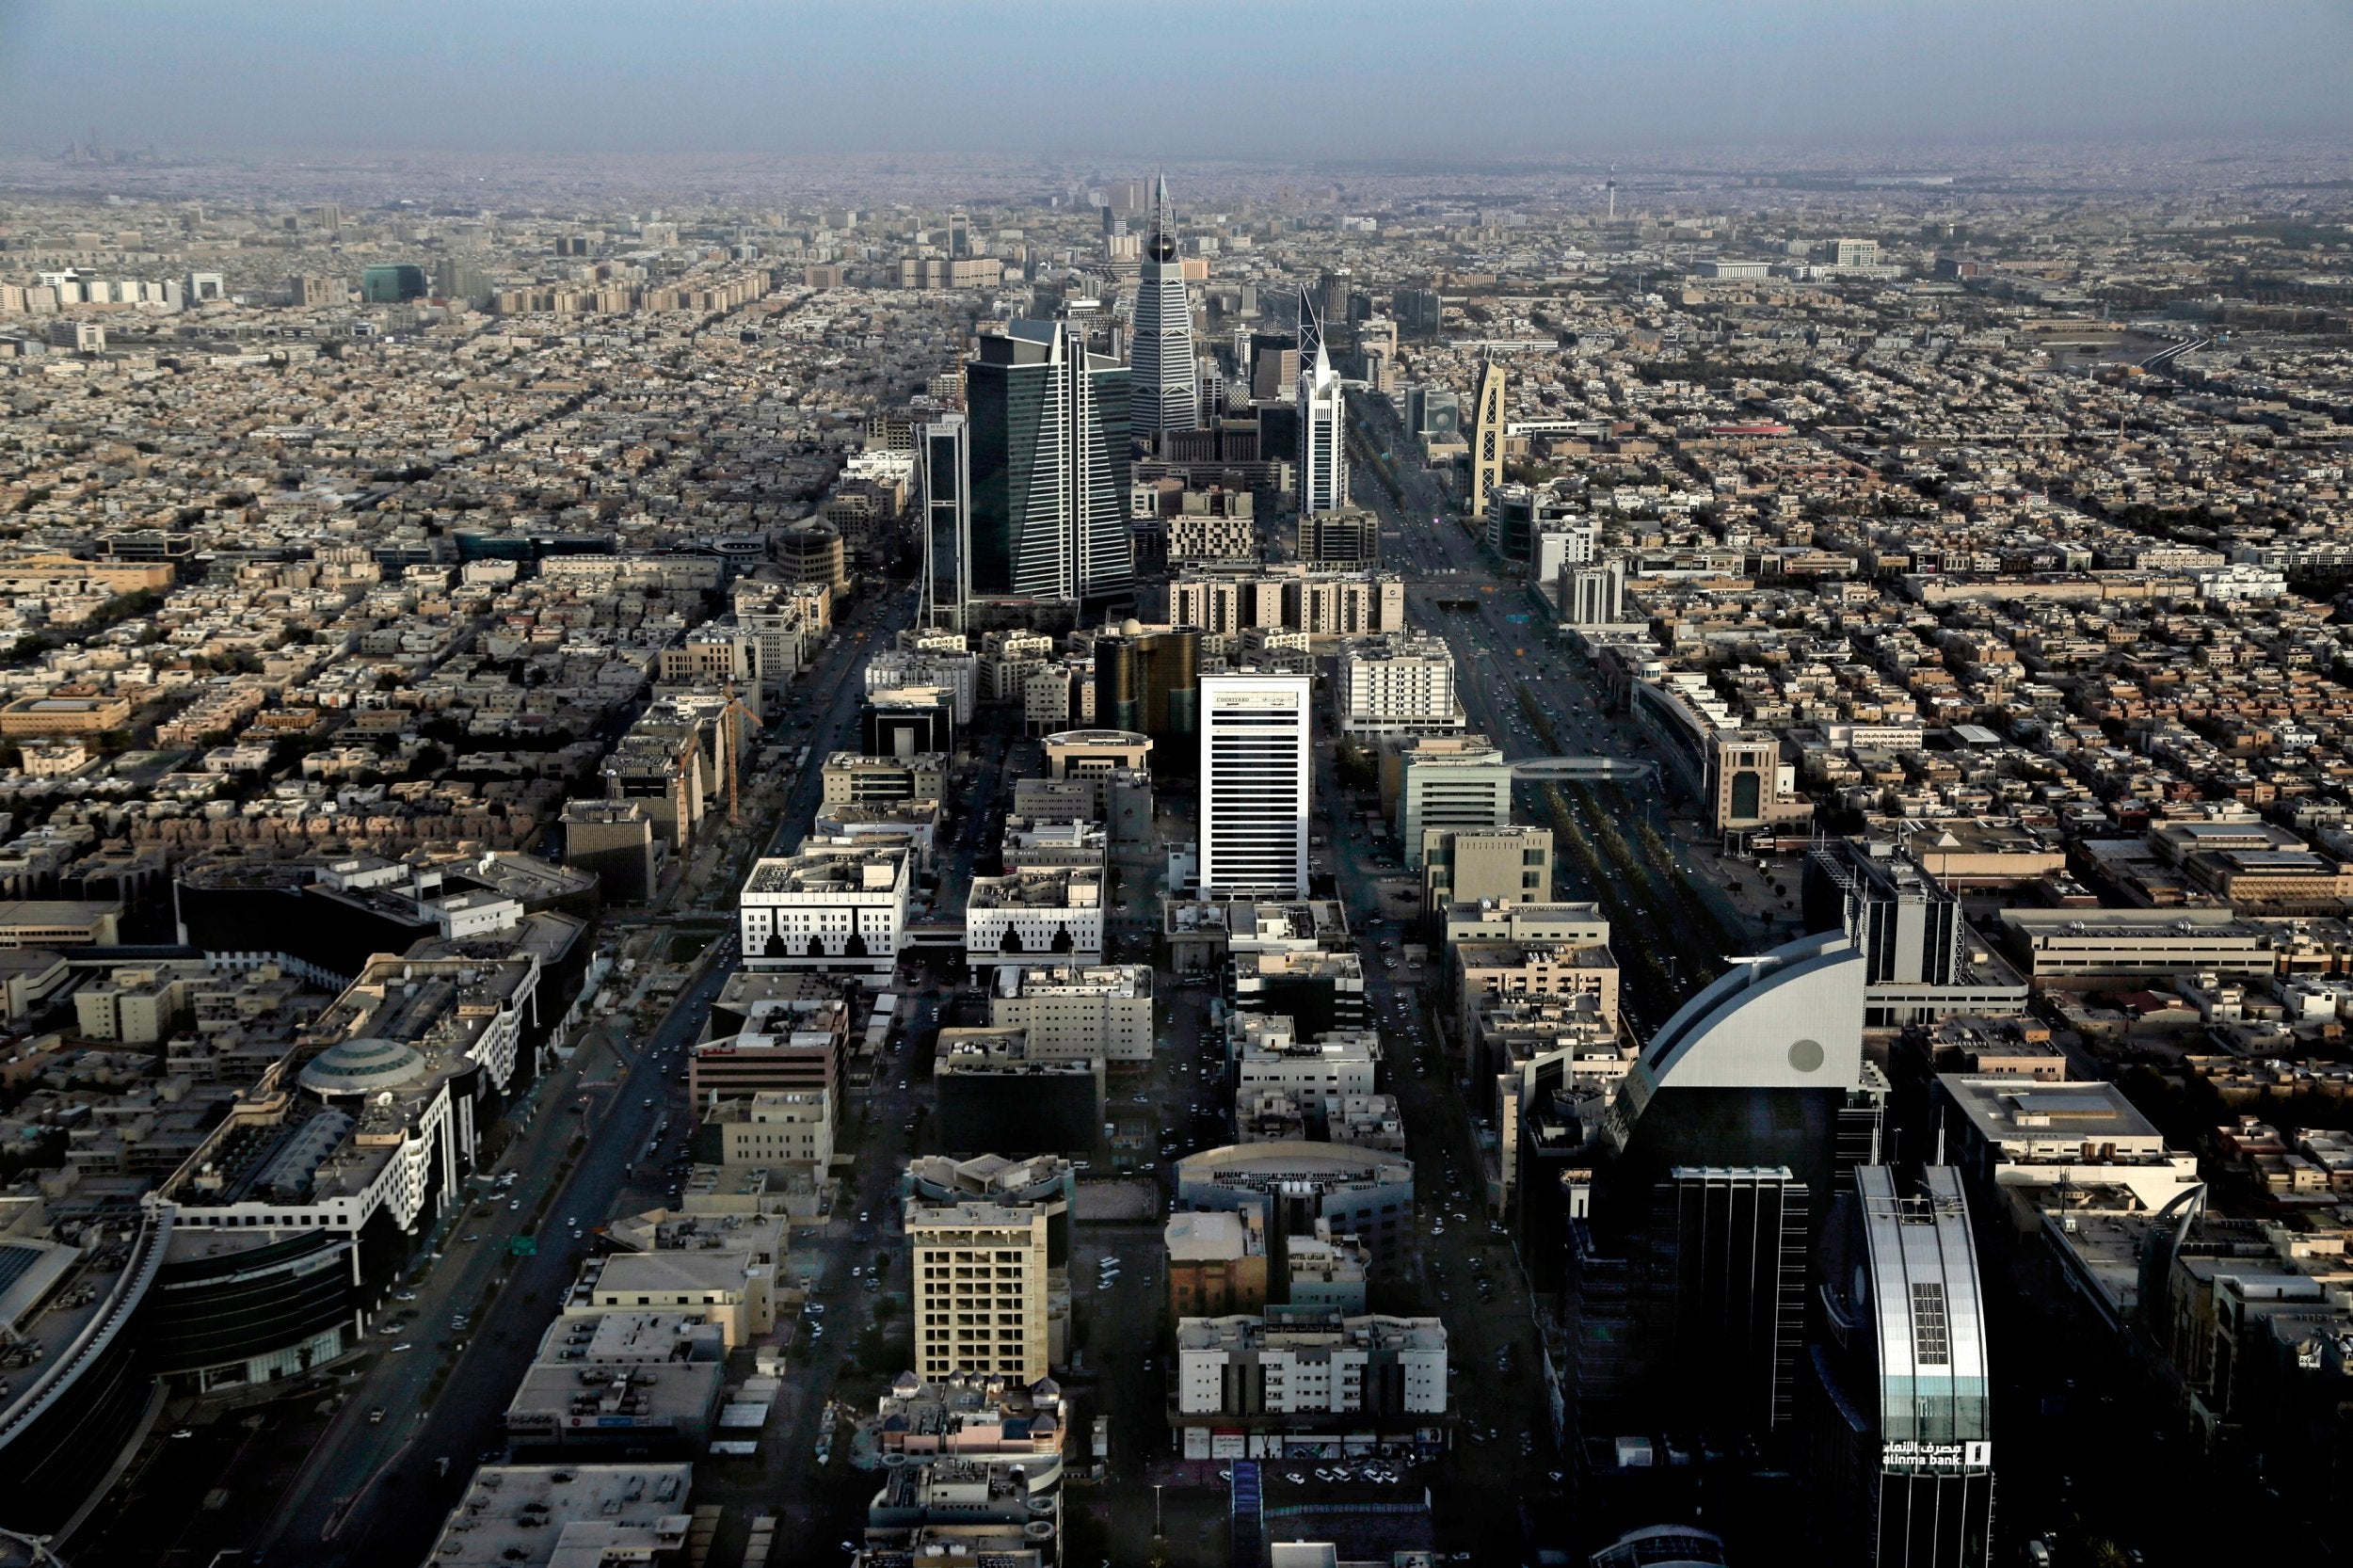 A general view of Riyadh, the capital of Saudi Arabia. EU banks dealing with Saudi payments will have to apply more stringent checks if the list is approved by member states